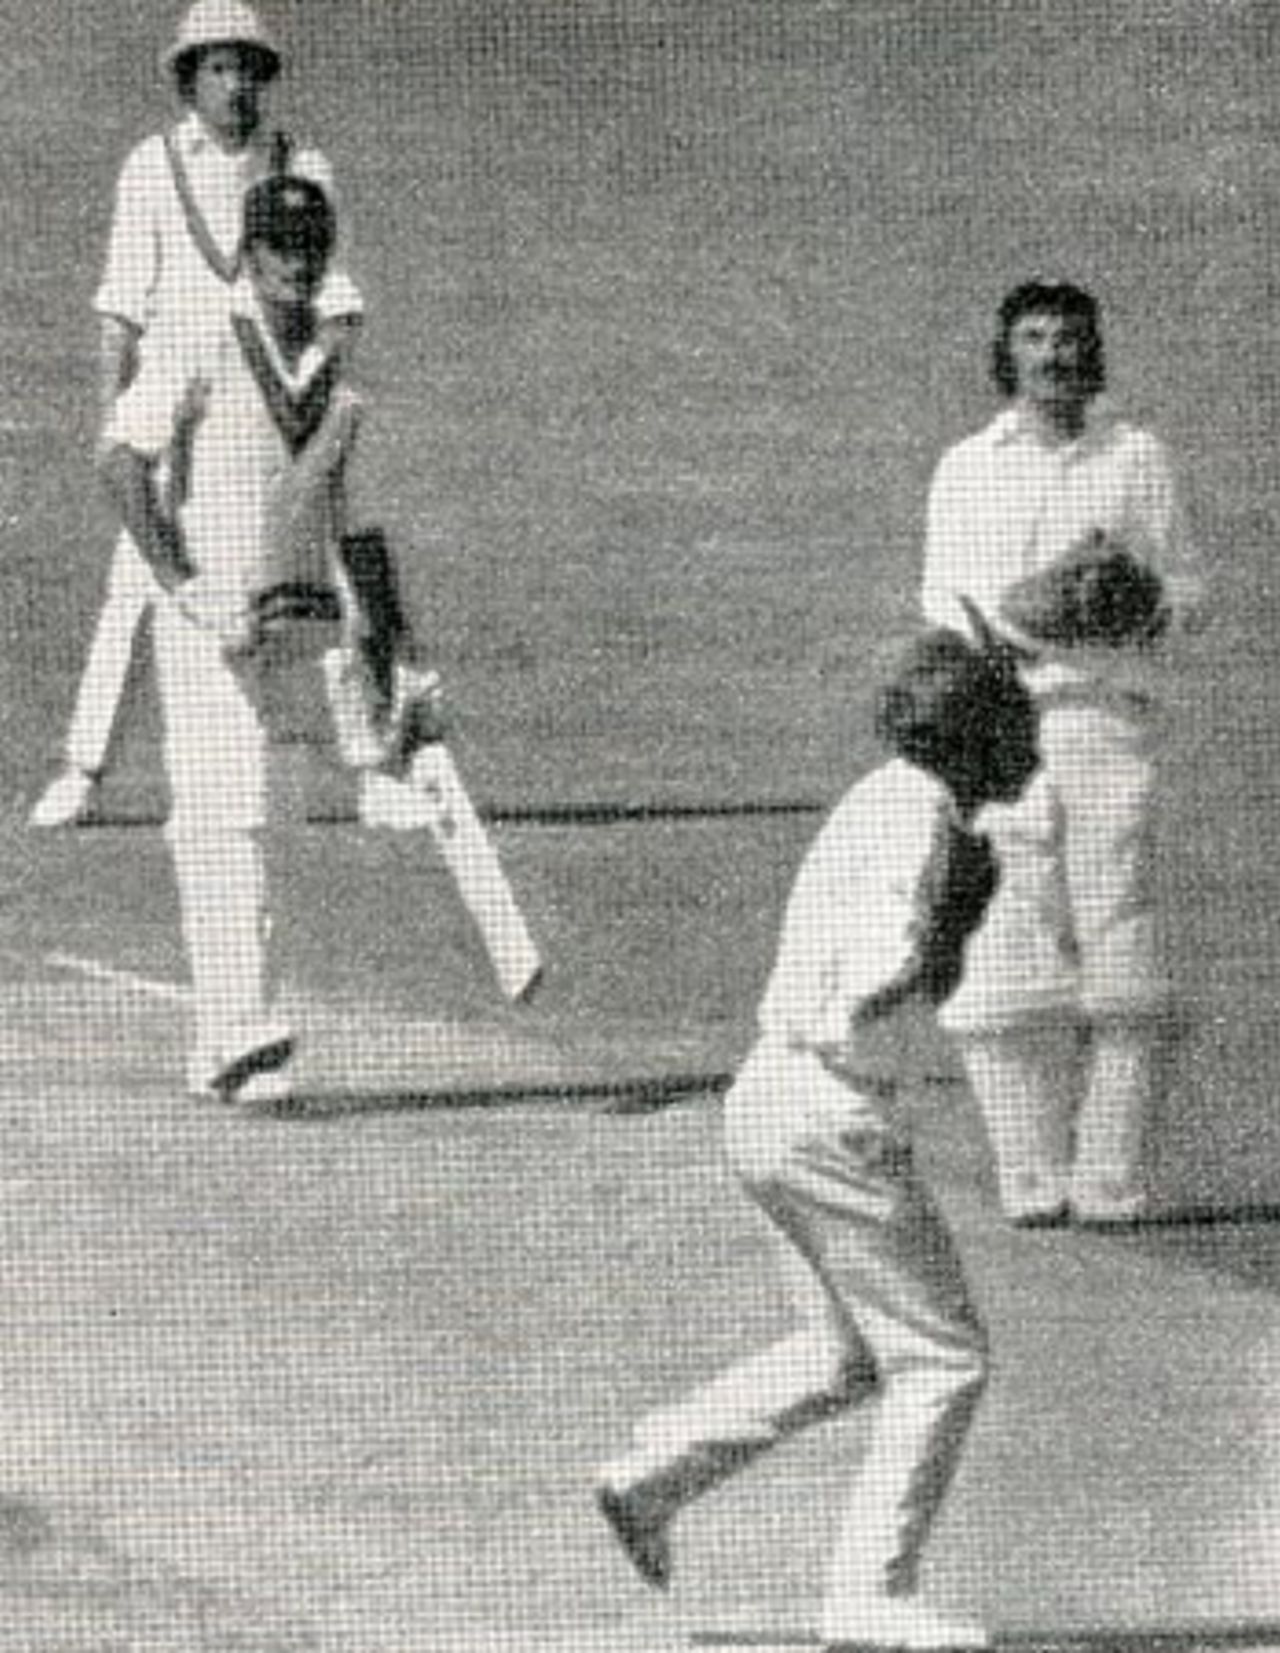 Ajit Wadekar is caught and bowled by Derek Underwood, India v England, 3rd Test, January 17, 1973